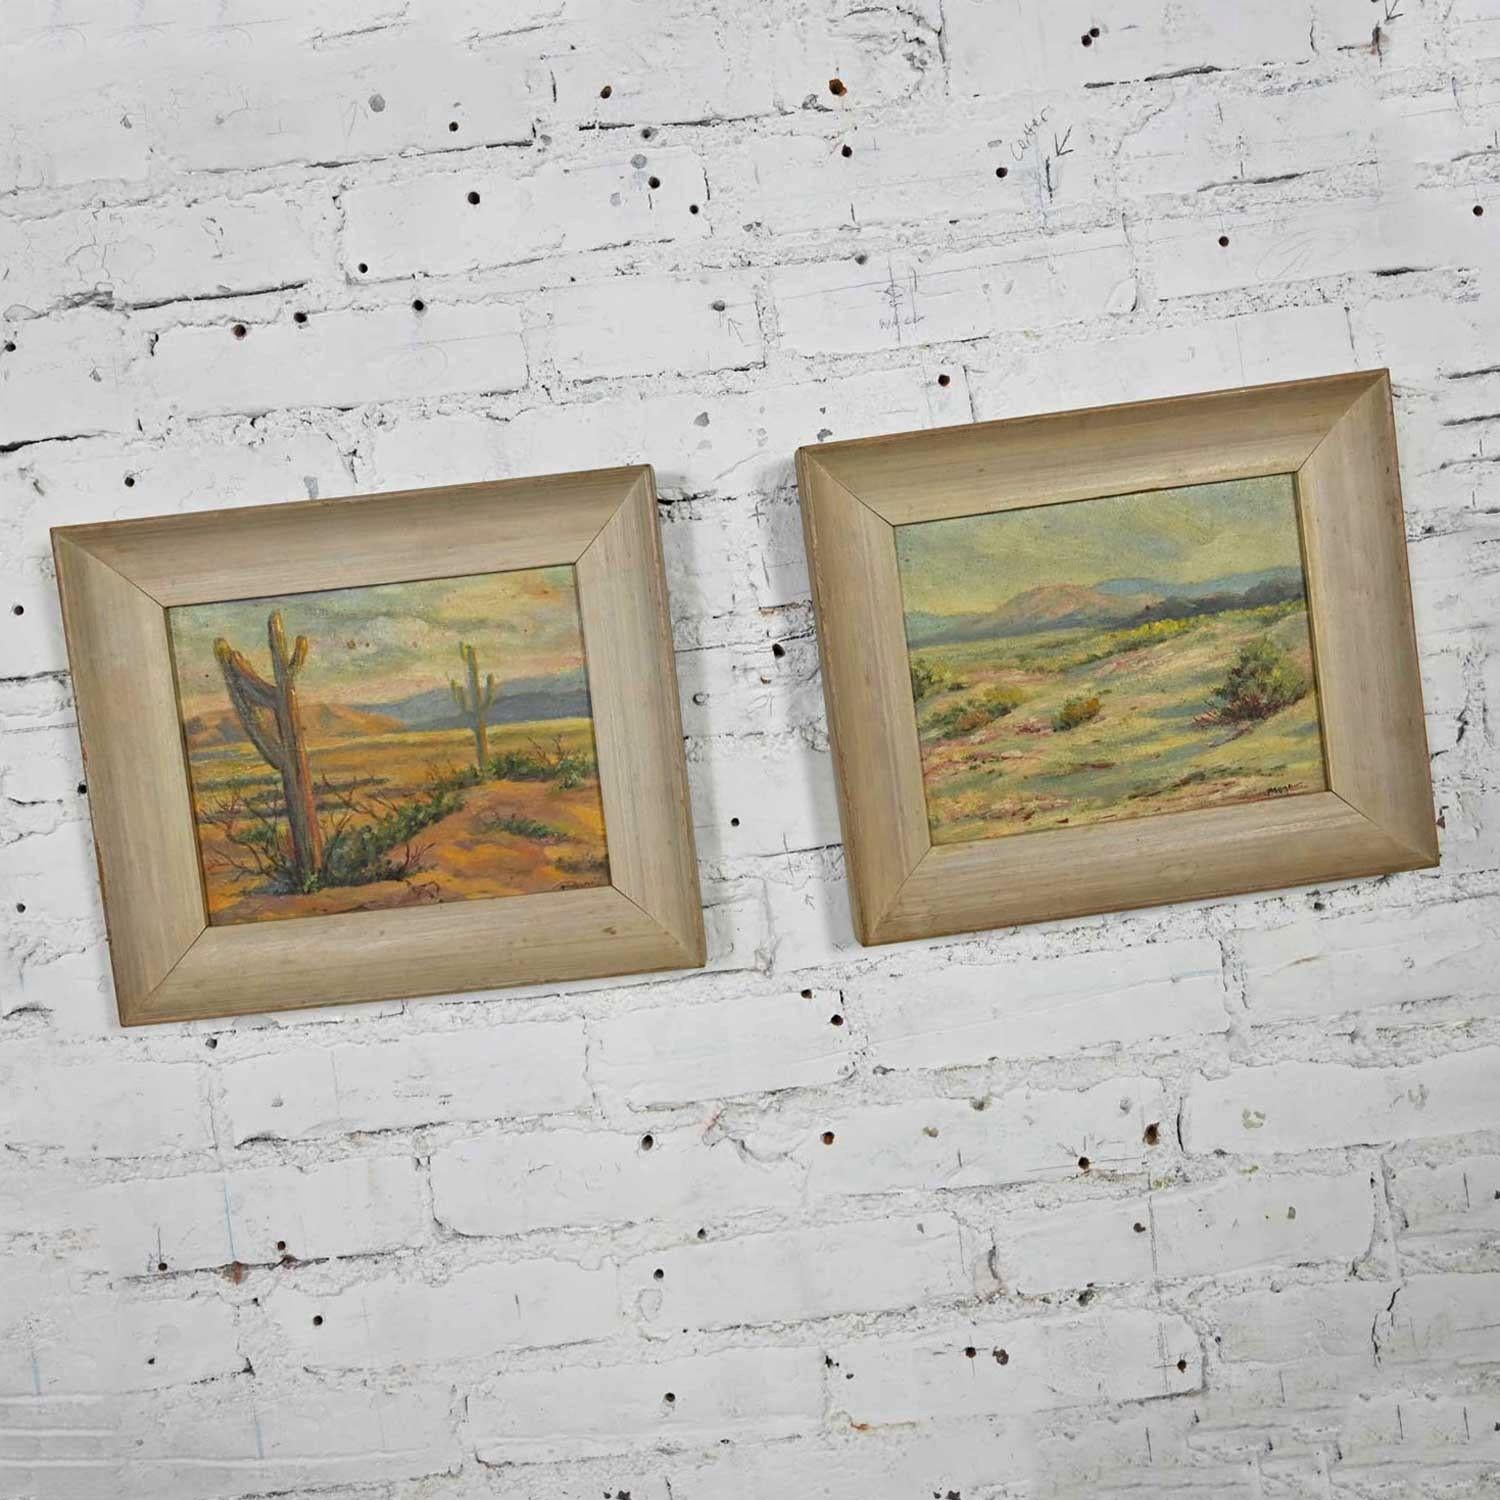 Gorgeous pair of mid-century California desert oil paintings by H. Meade in pickled wood frames. Beautiful condition, keeping in mind that these are vintage and not new so will have signs of use and wear. They are yellowed from age so could benefit